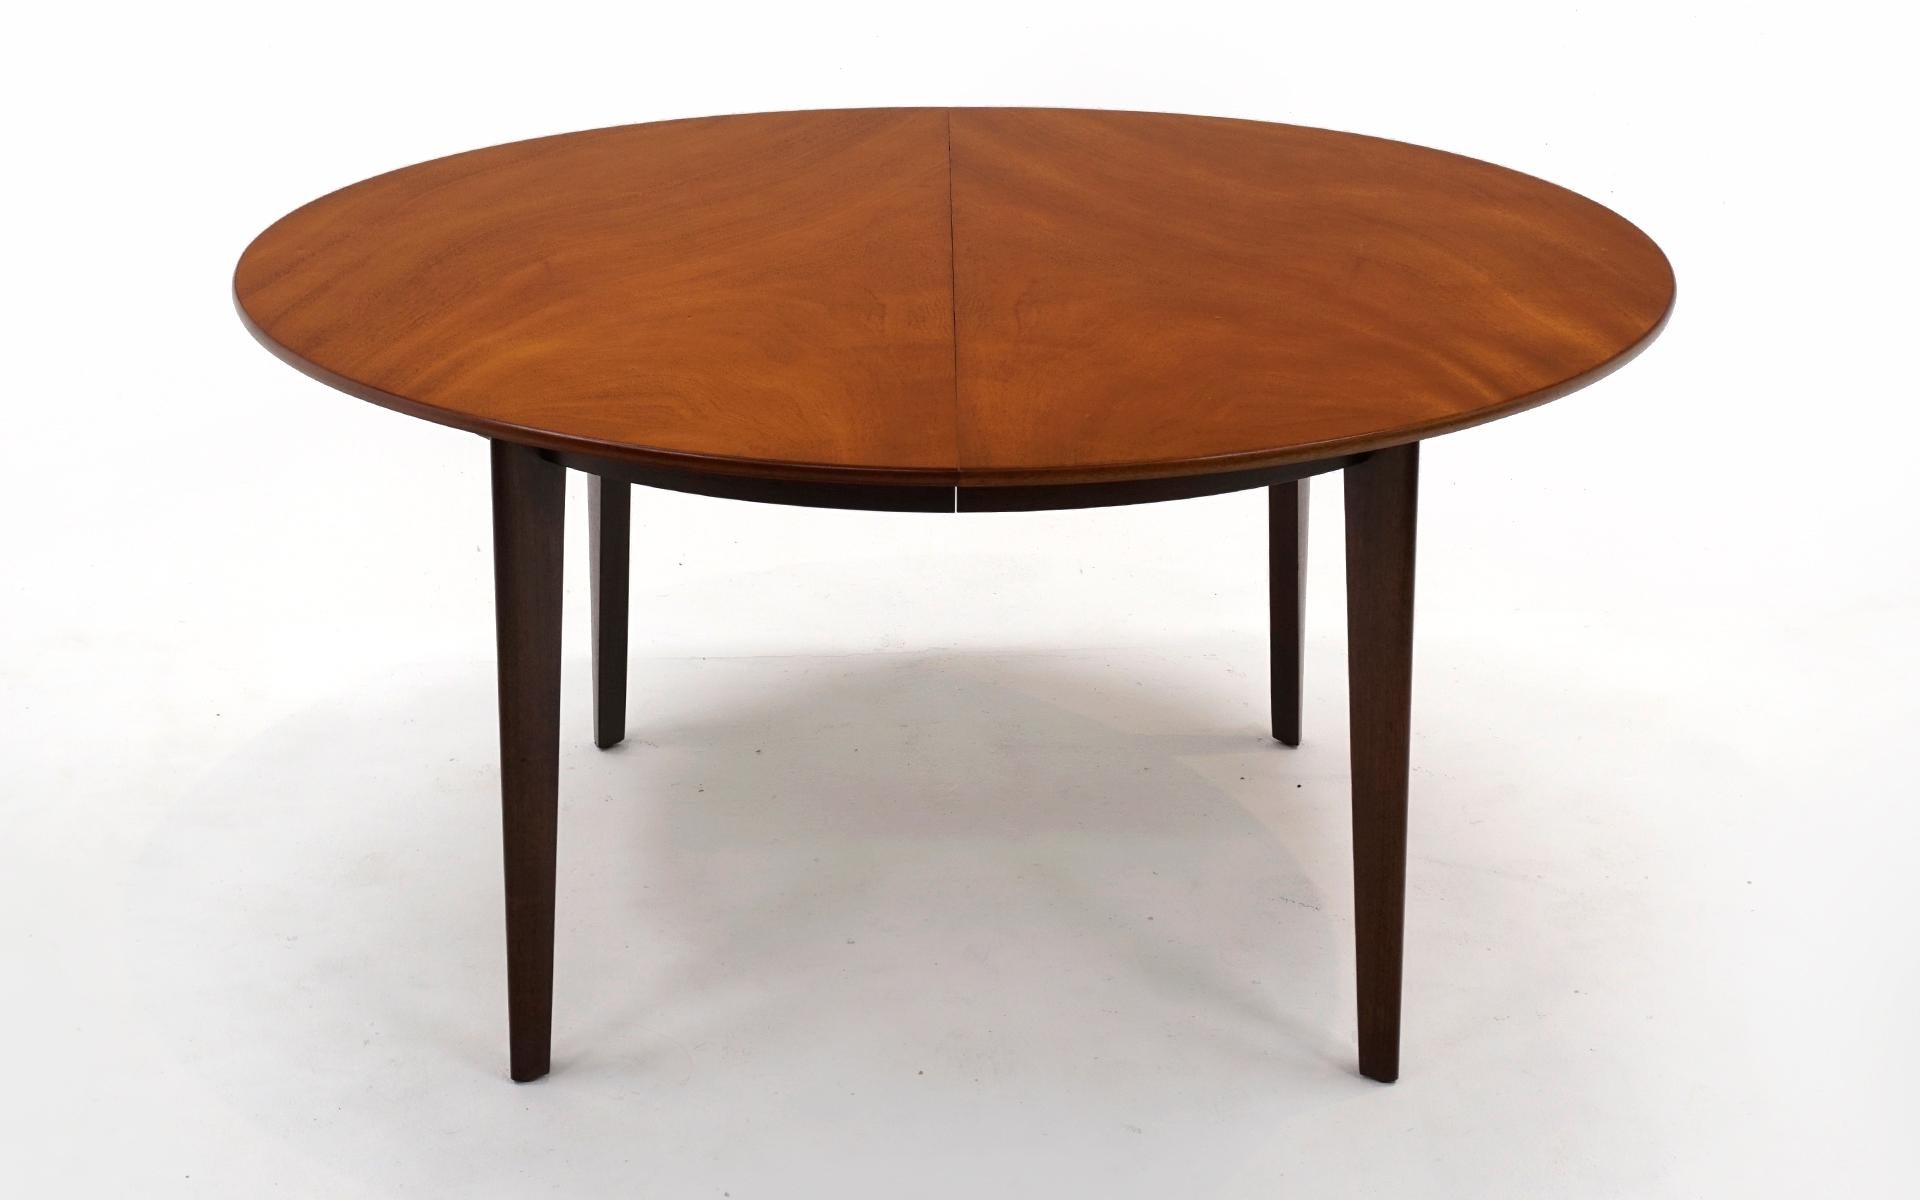 Exceptional expanding dining table designed by Edward Wormley and manufactured by Dunbar, 1950s. Each leaf is 24 inches wide. Table fully extended is 129 inches wide. This is one of the best dining tables we've handled in our 25 years in business.